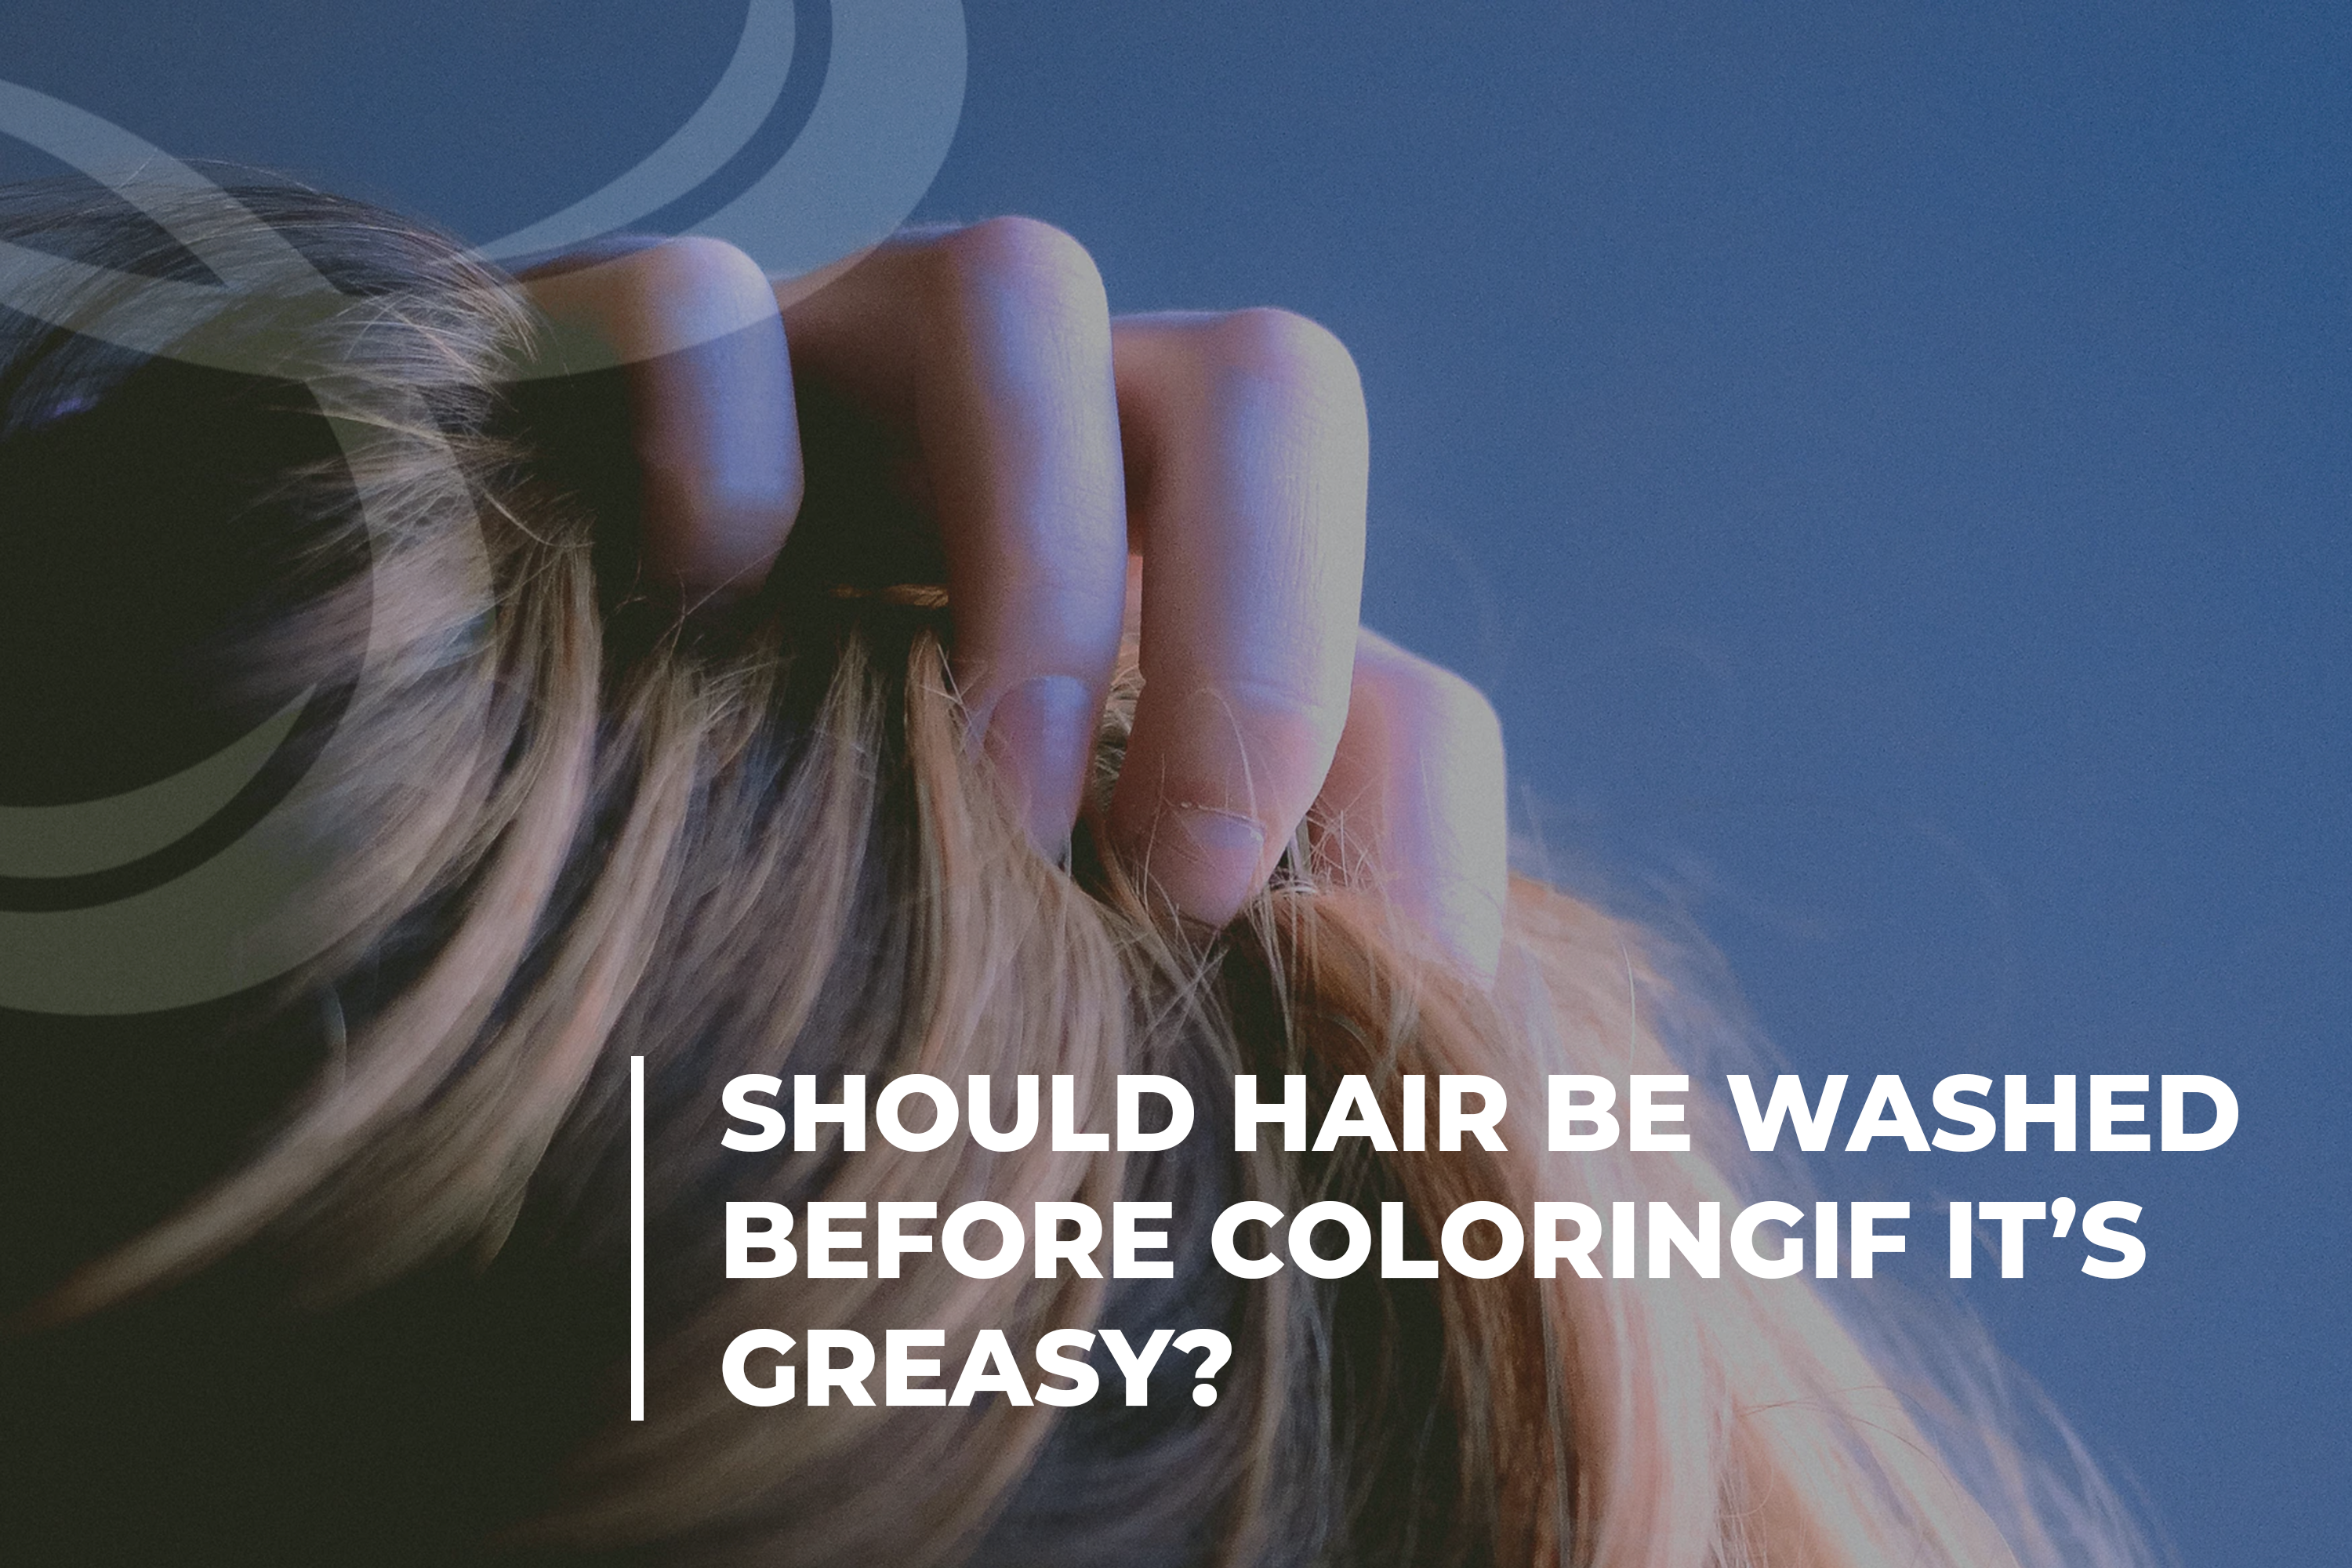 Should hair be washed before coloring if greasy